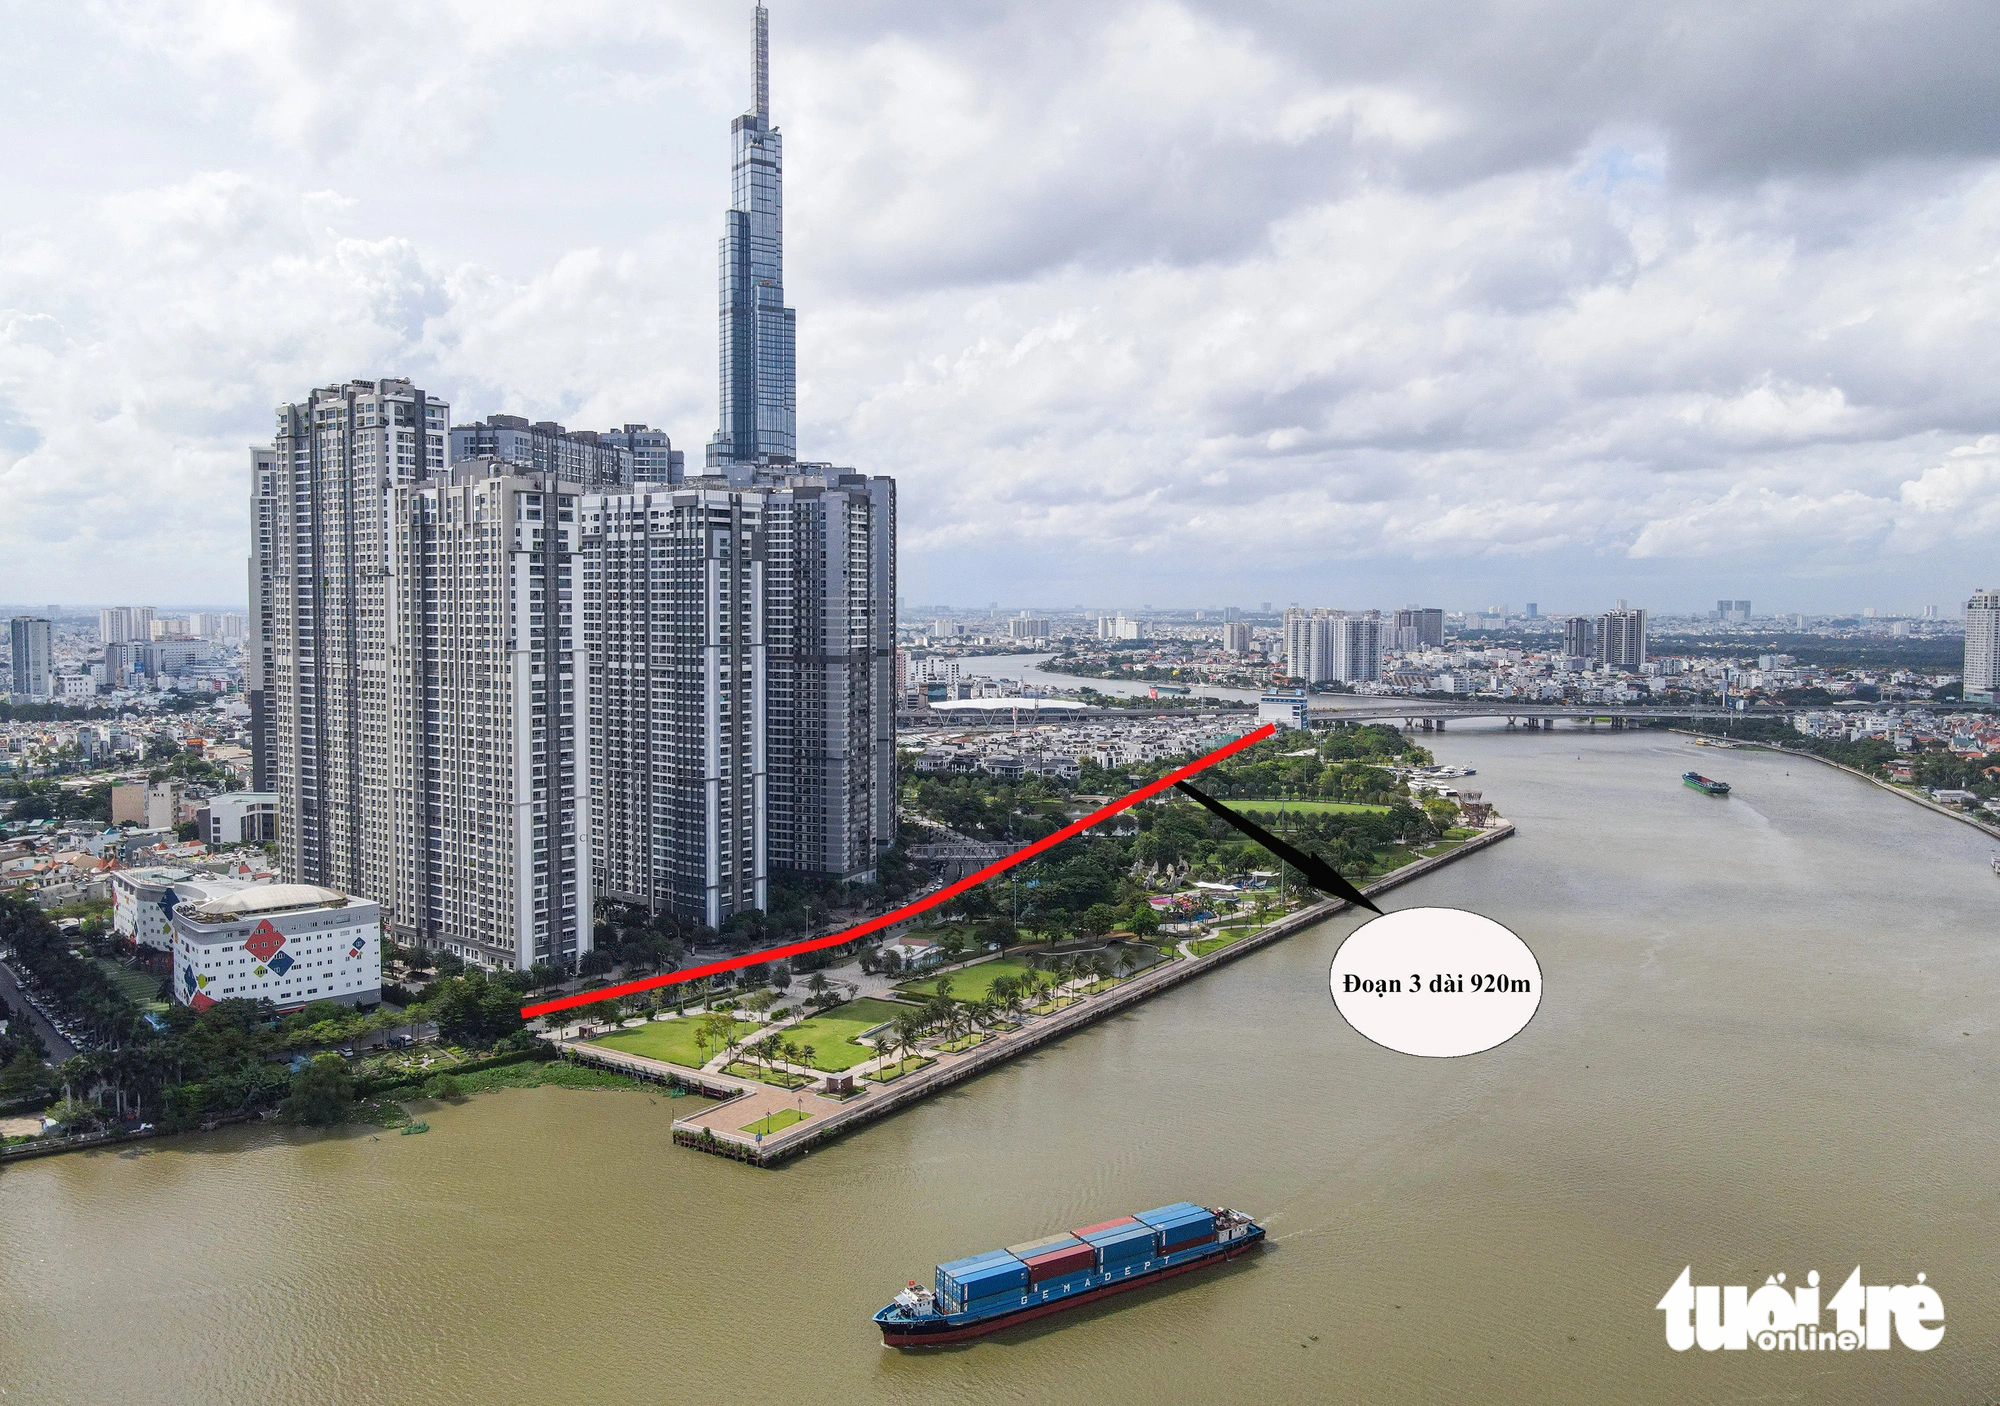 According to the city’s road designing plan, the end of the projected riverside route would be some 920 meters long and roughly 35 meters wide. Photo: Tuoi Tre